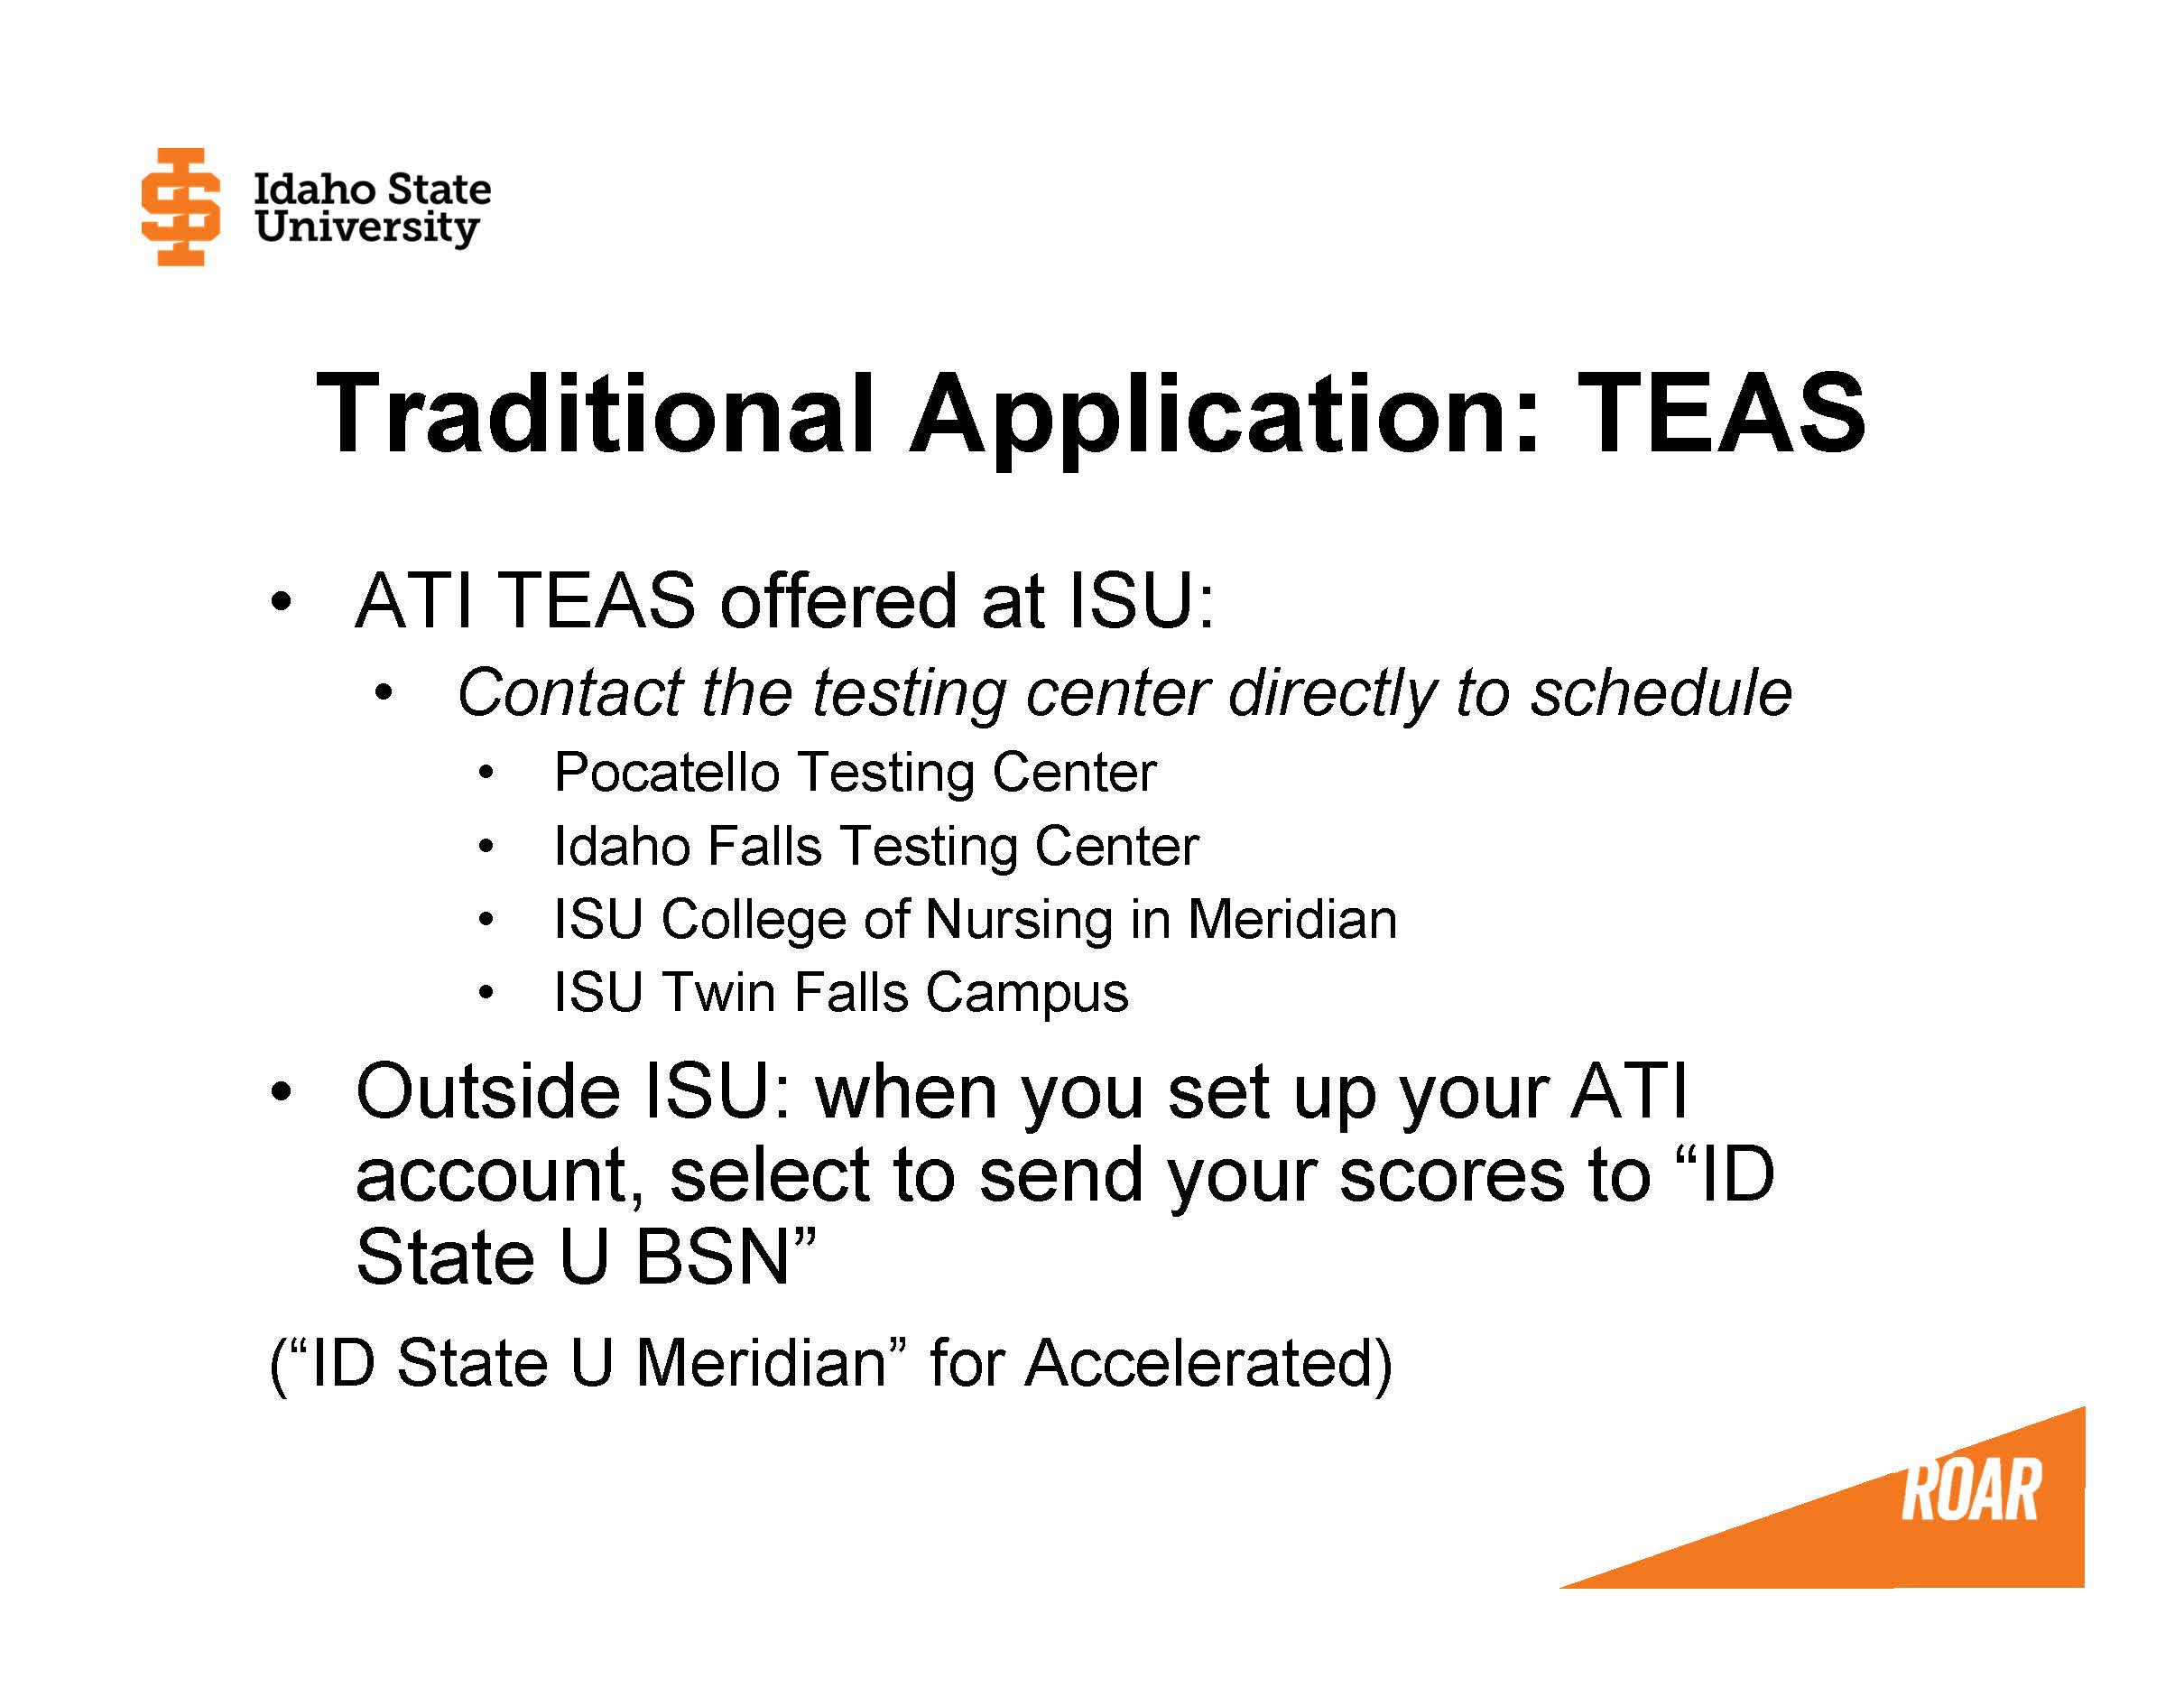 ATI TEAS offered at ISU: Contact the testing center directly to schedule Pocatello Testing Center  Idaho Falls Testing Center  ISU College of Nursing in Meridian ISU Twin Falls Campus Outside ISU: when you set up your ATI account, select to send your scores to “ID State U BSN”                          (“ID State U Meridian” for Accelerated)